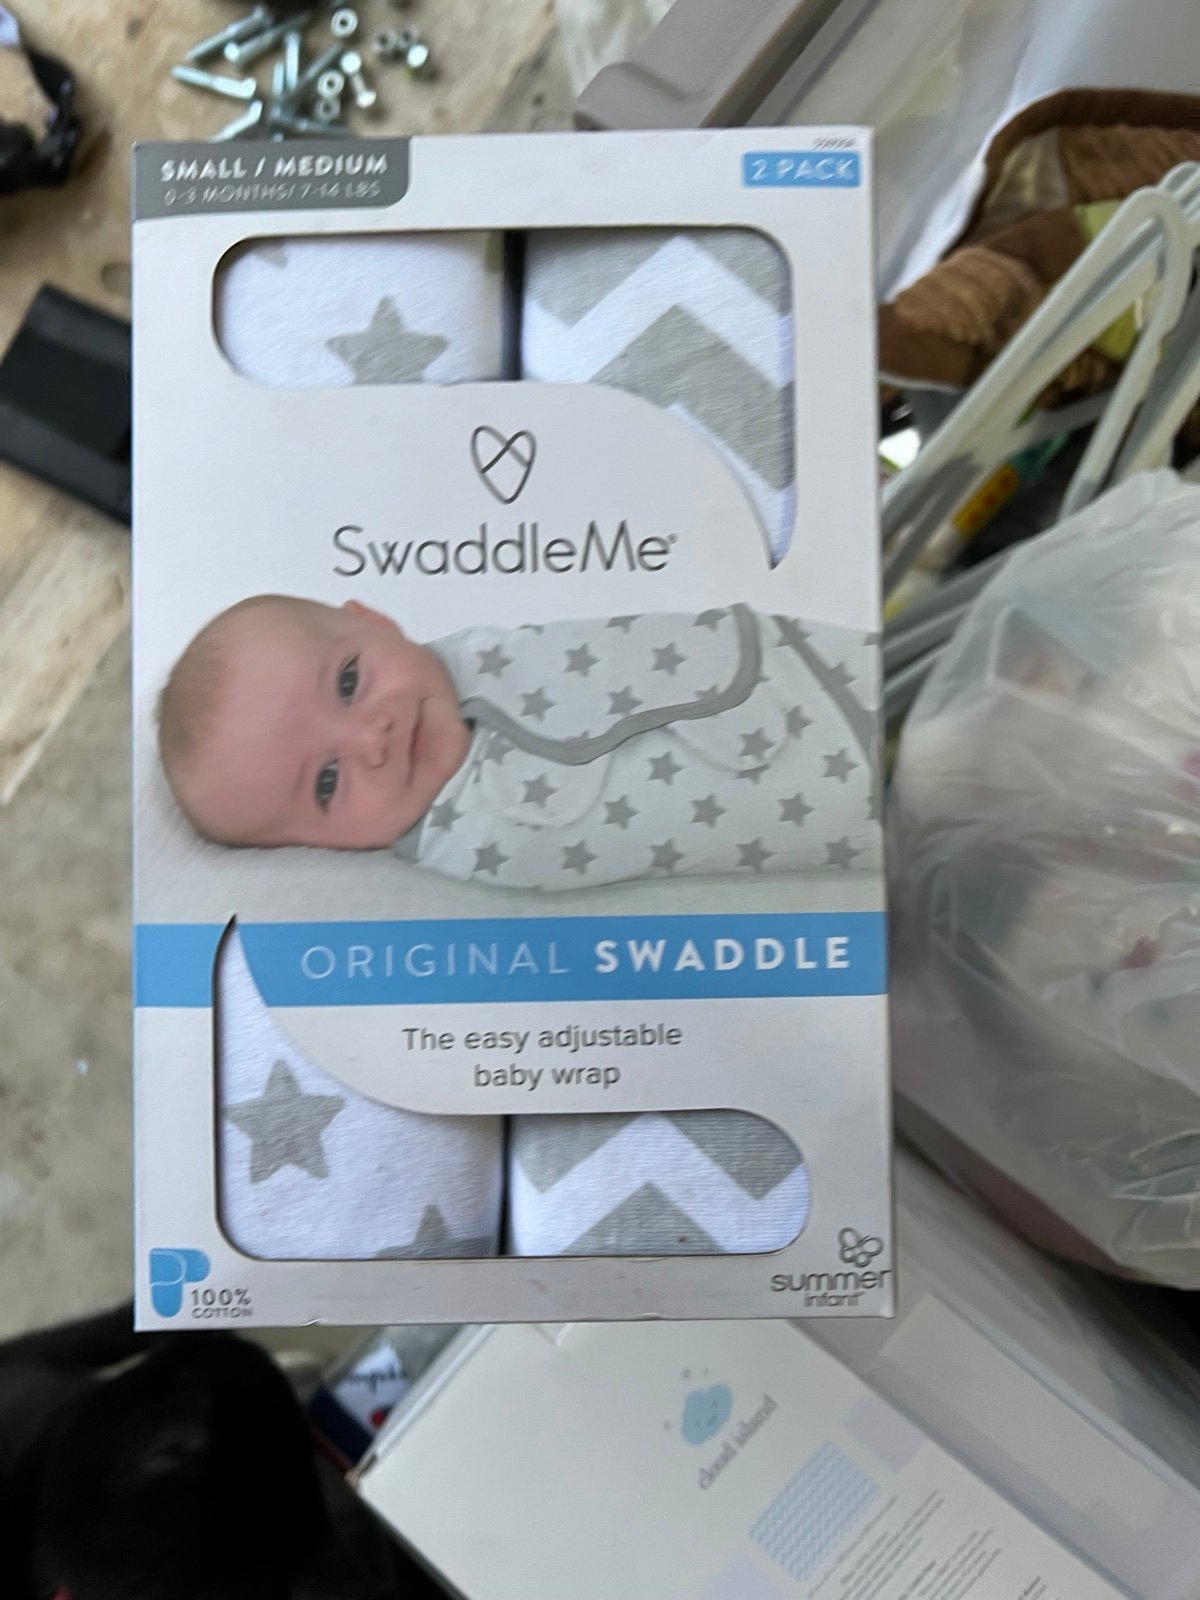 Swaddle me Original swaddle 2 pack 40lSrZzL5